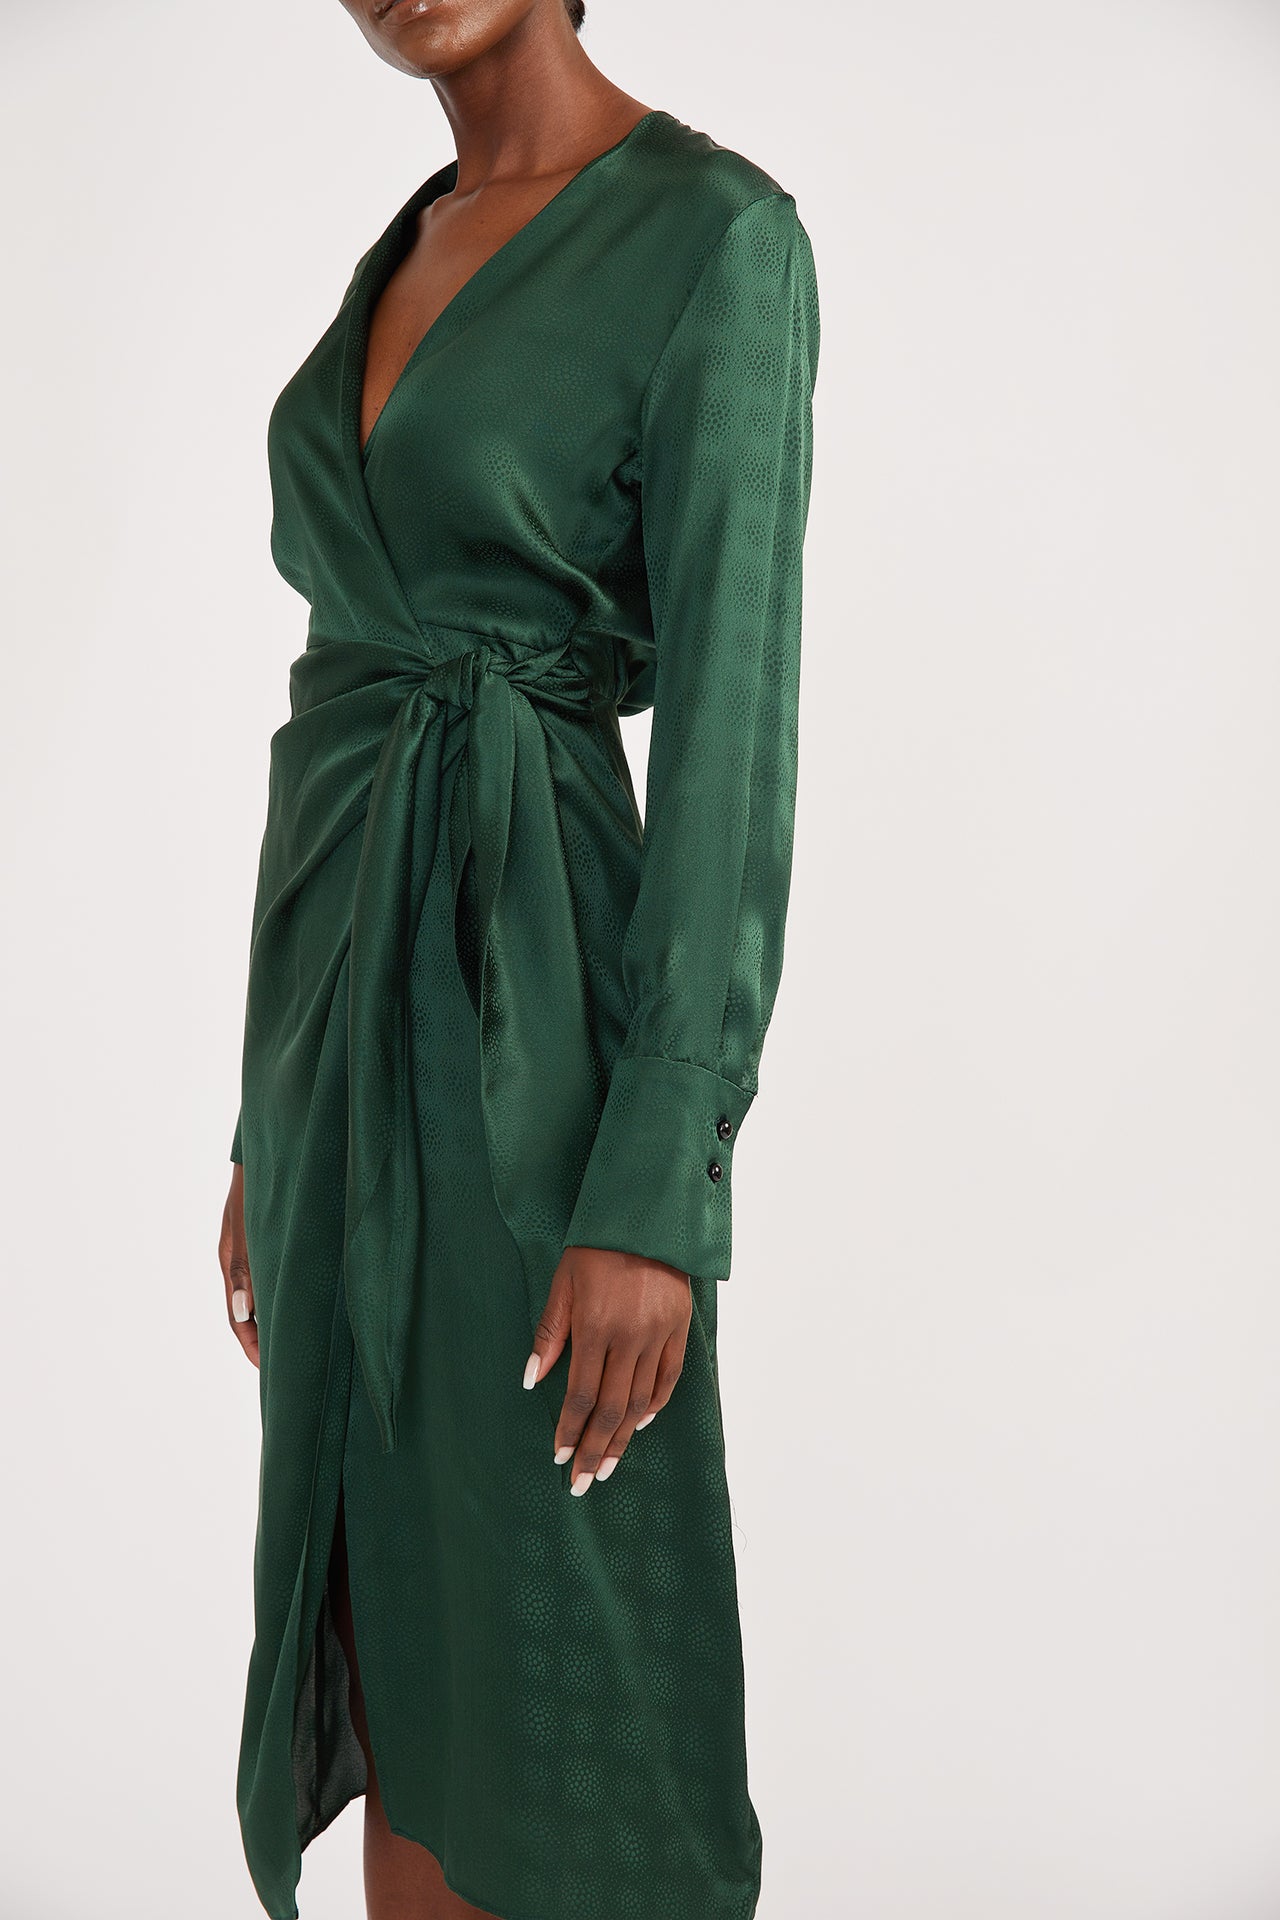 Wrap Dress in Forest Green